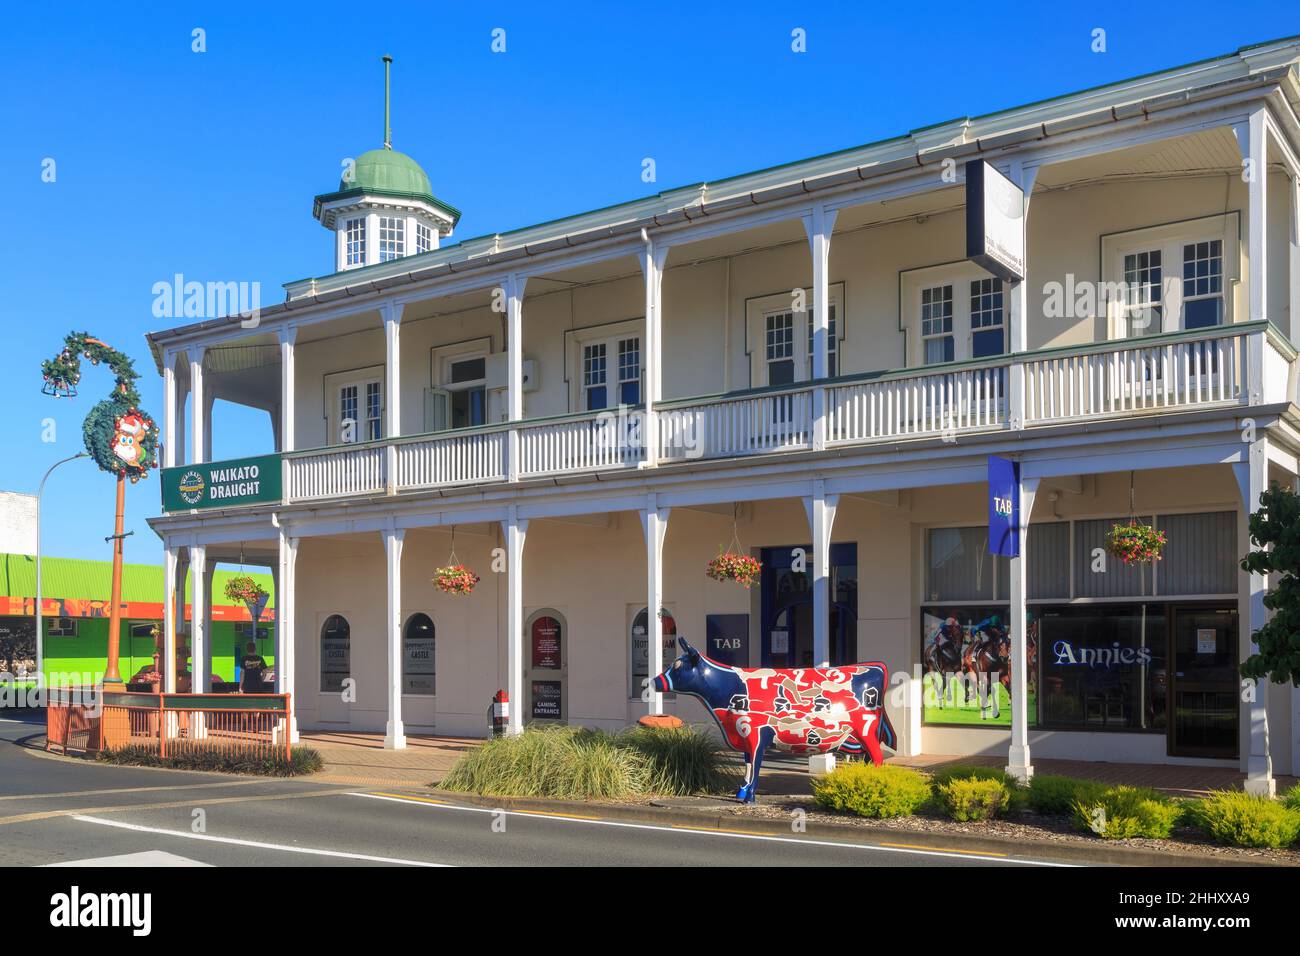 Morrinsville, New Zealand. Nottingham Castle Hotel (1914), a historic building, with one of the town's many life-sized cow sculptures outside Stock Photo